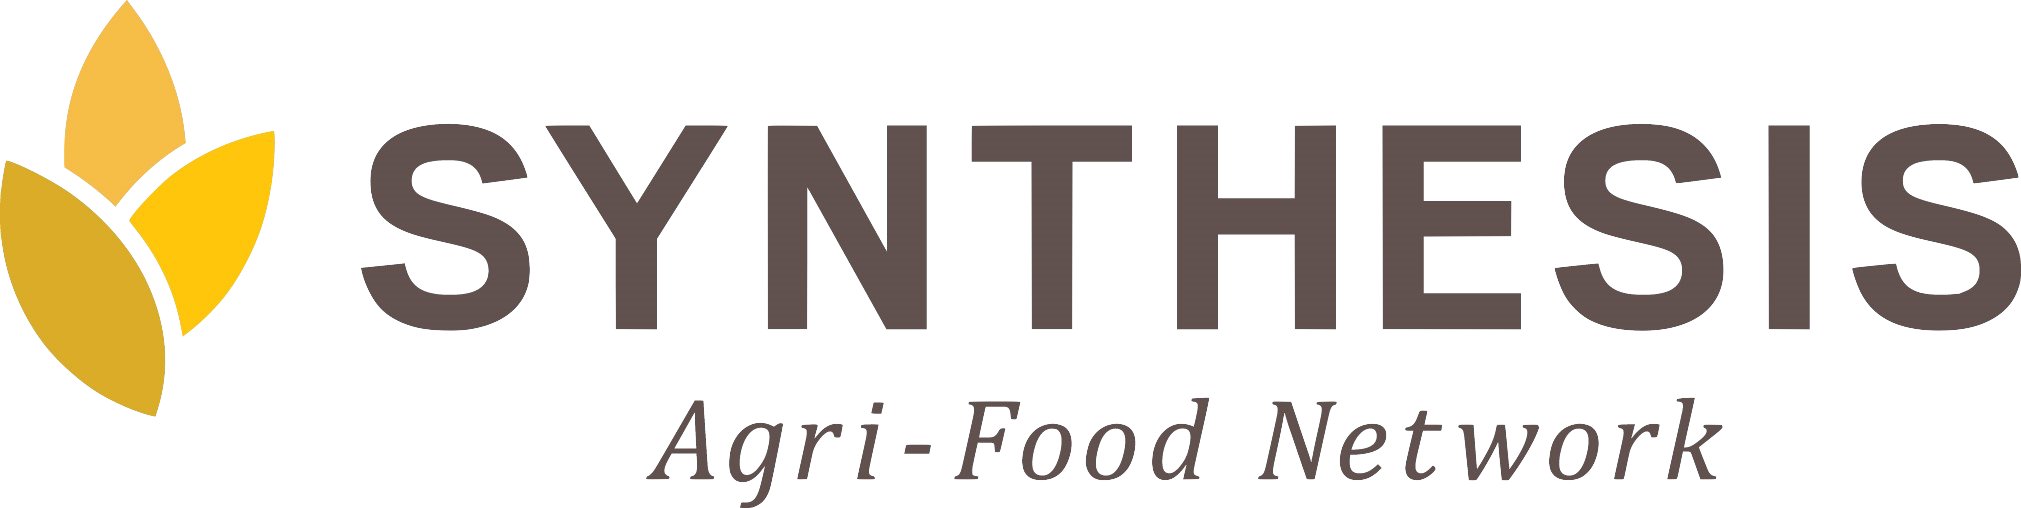 Synthesis Agri-Food Network